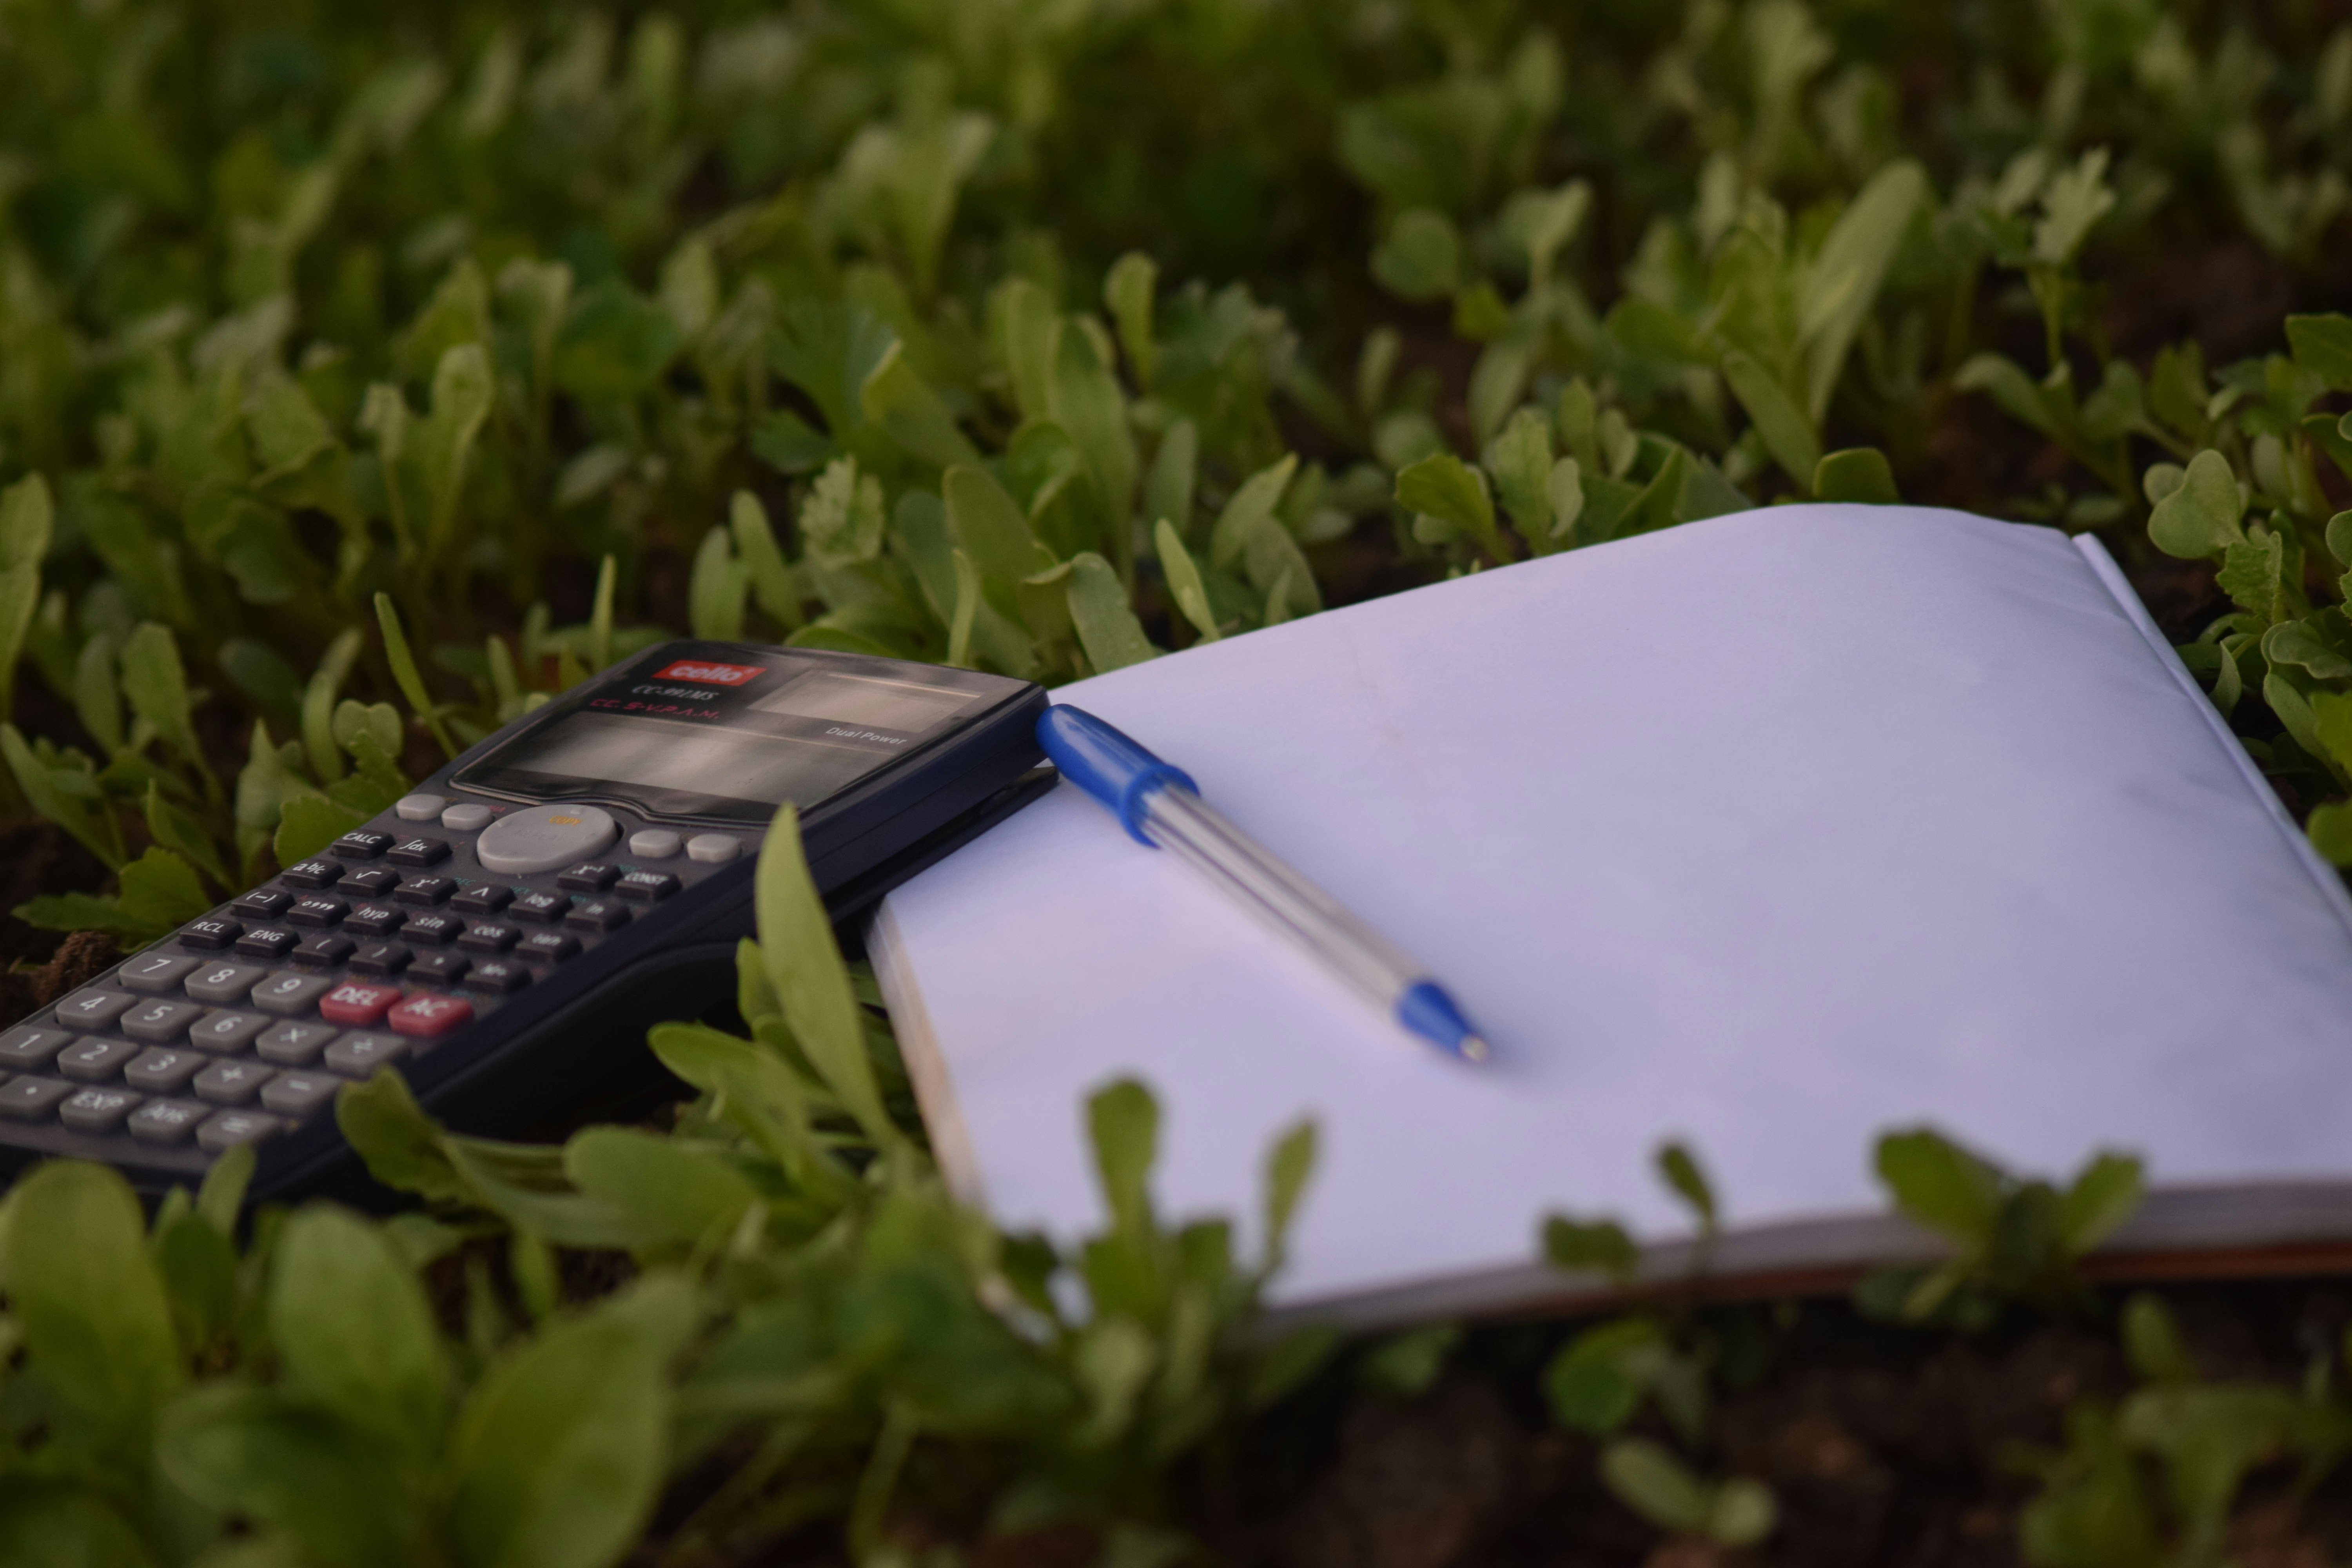 a picture of a calculator and paper in the grass that you use to figure out whether you should invest in an index fund vs mutual fund